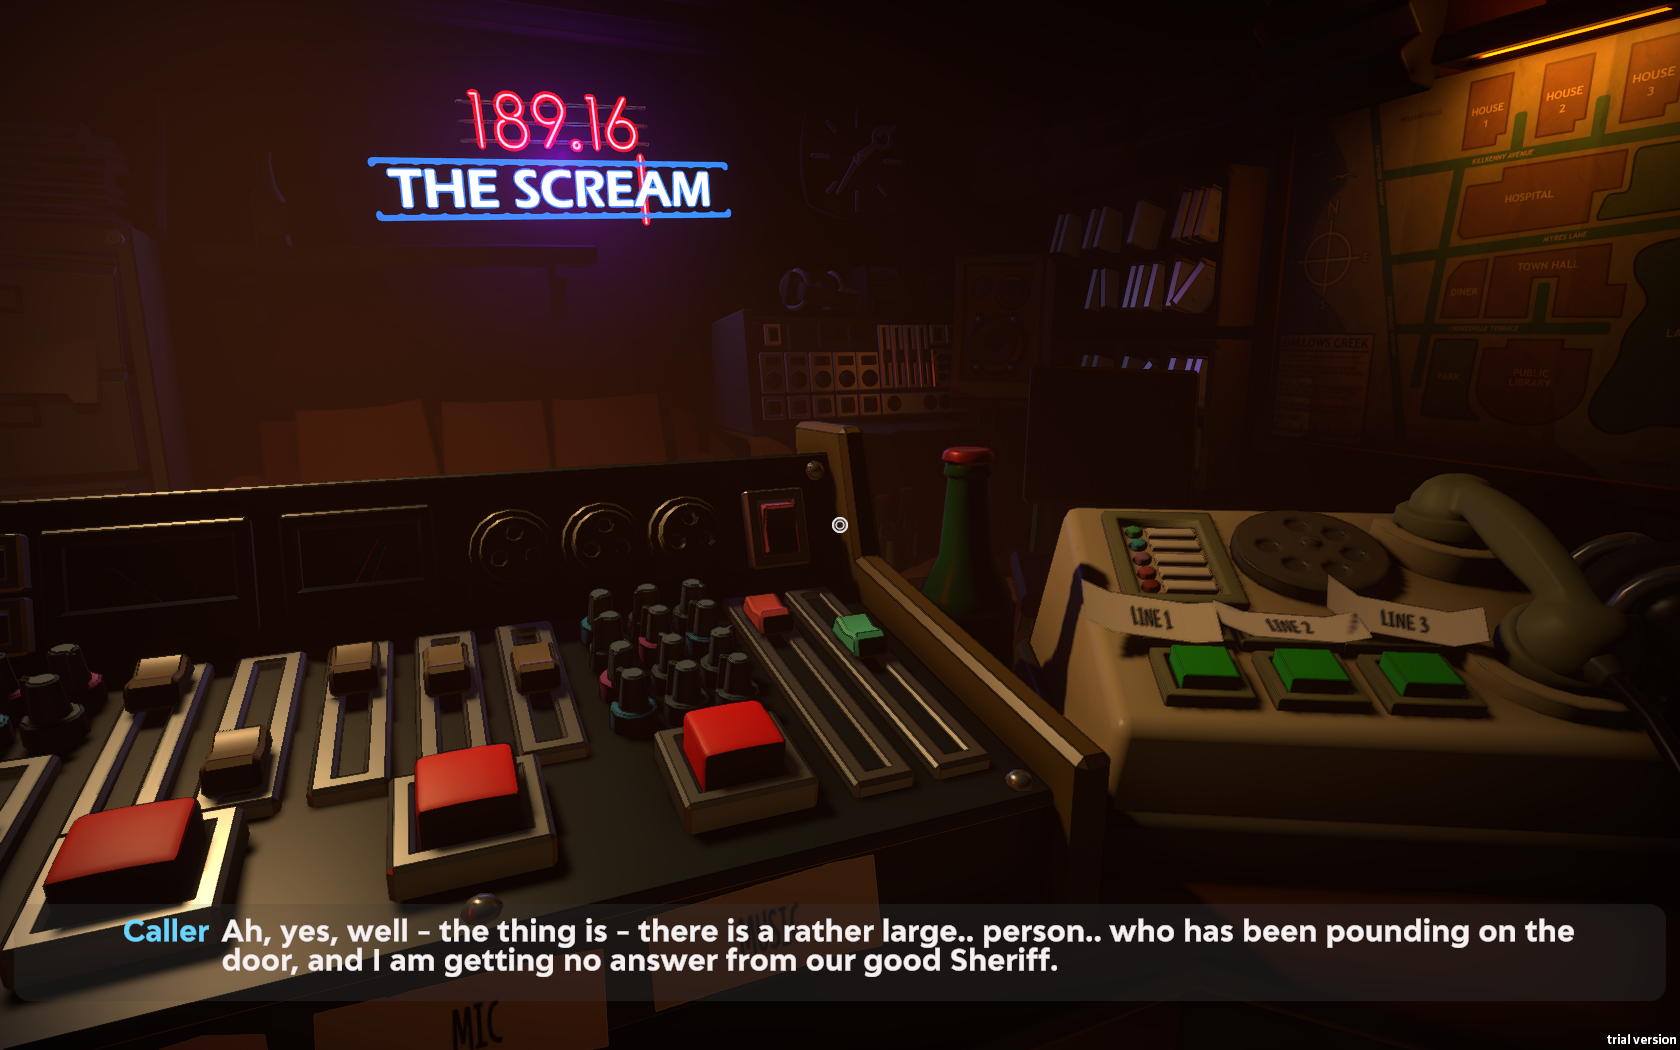 Screenshot with the view of the radio studio control panel